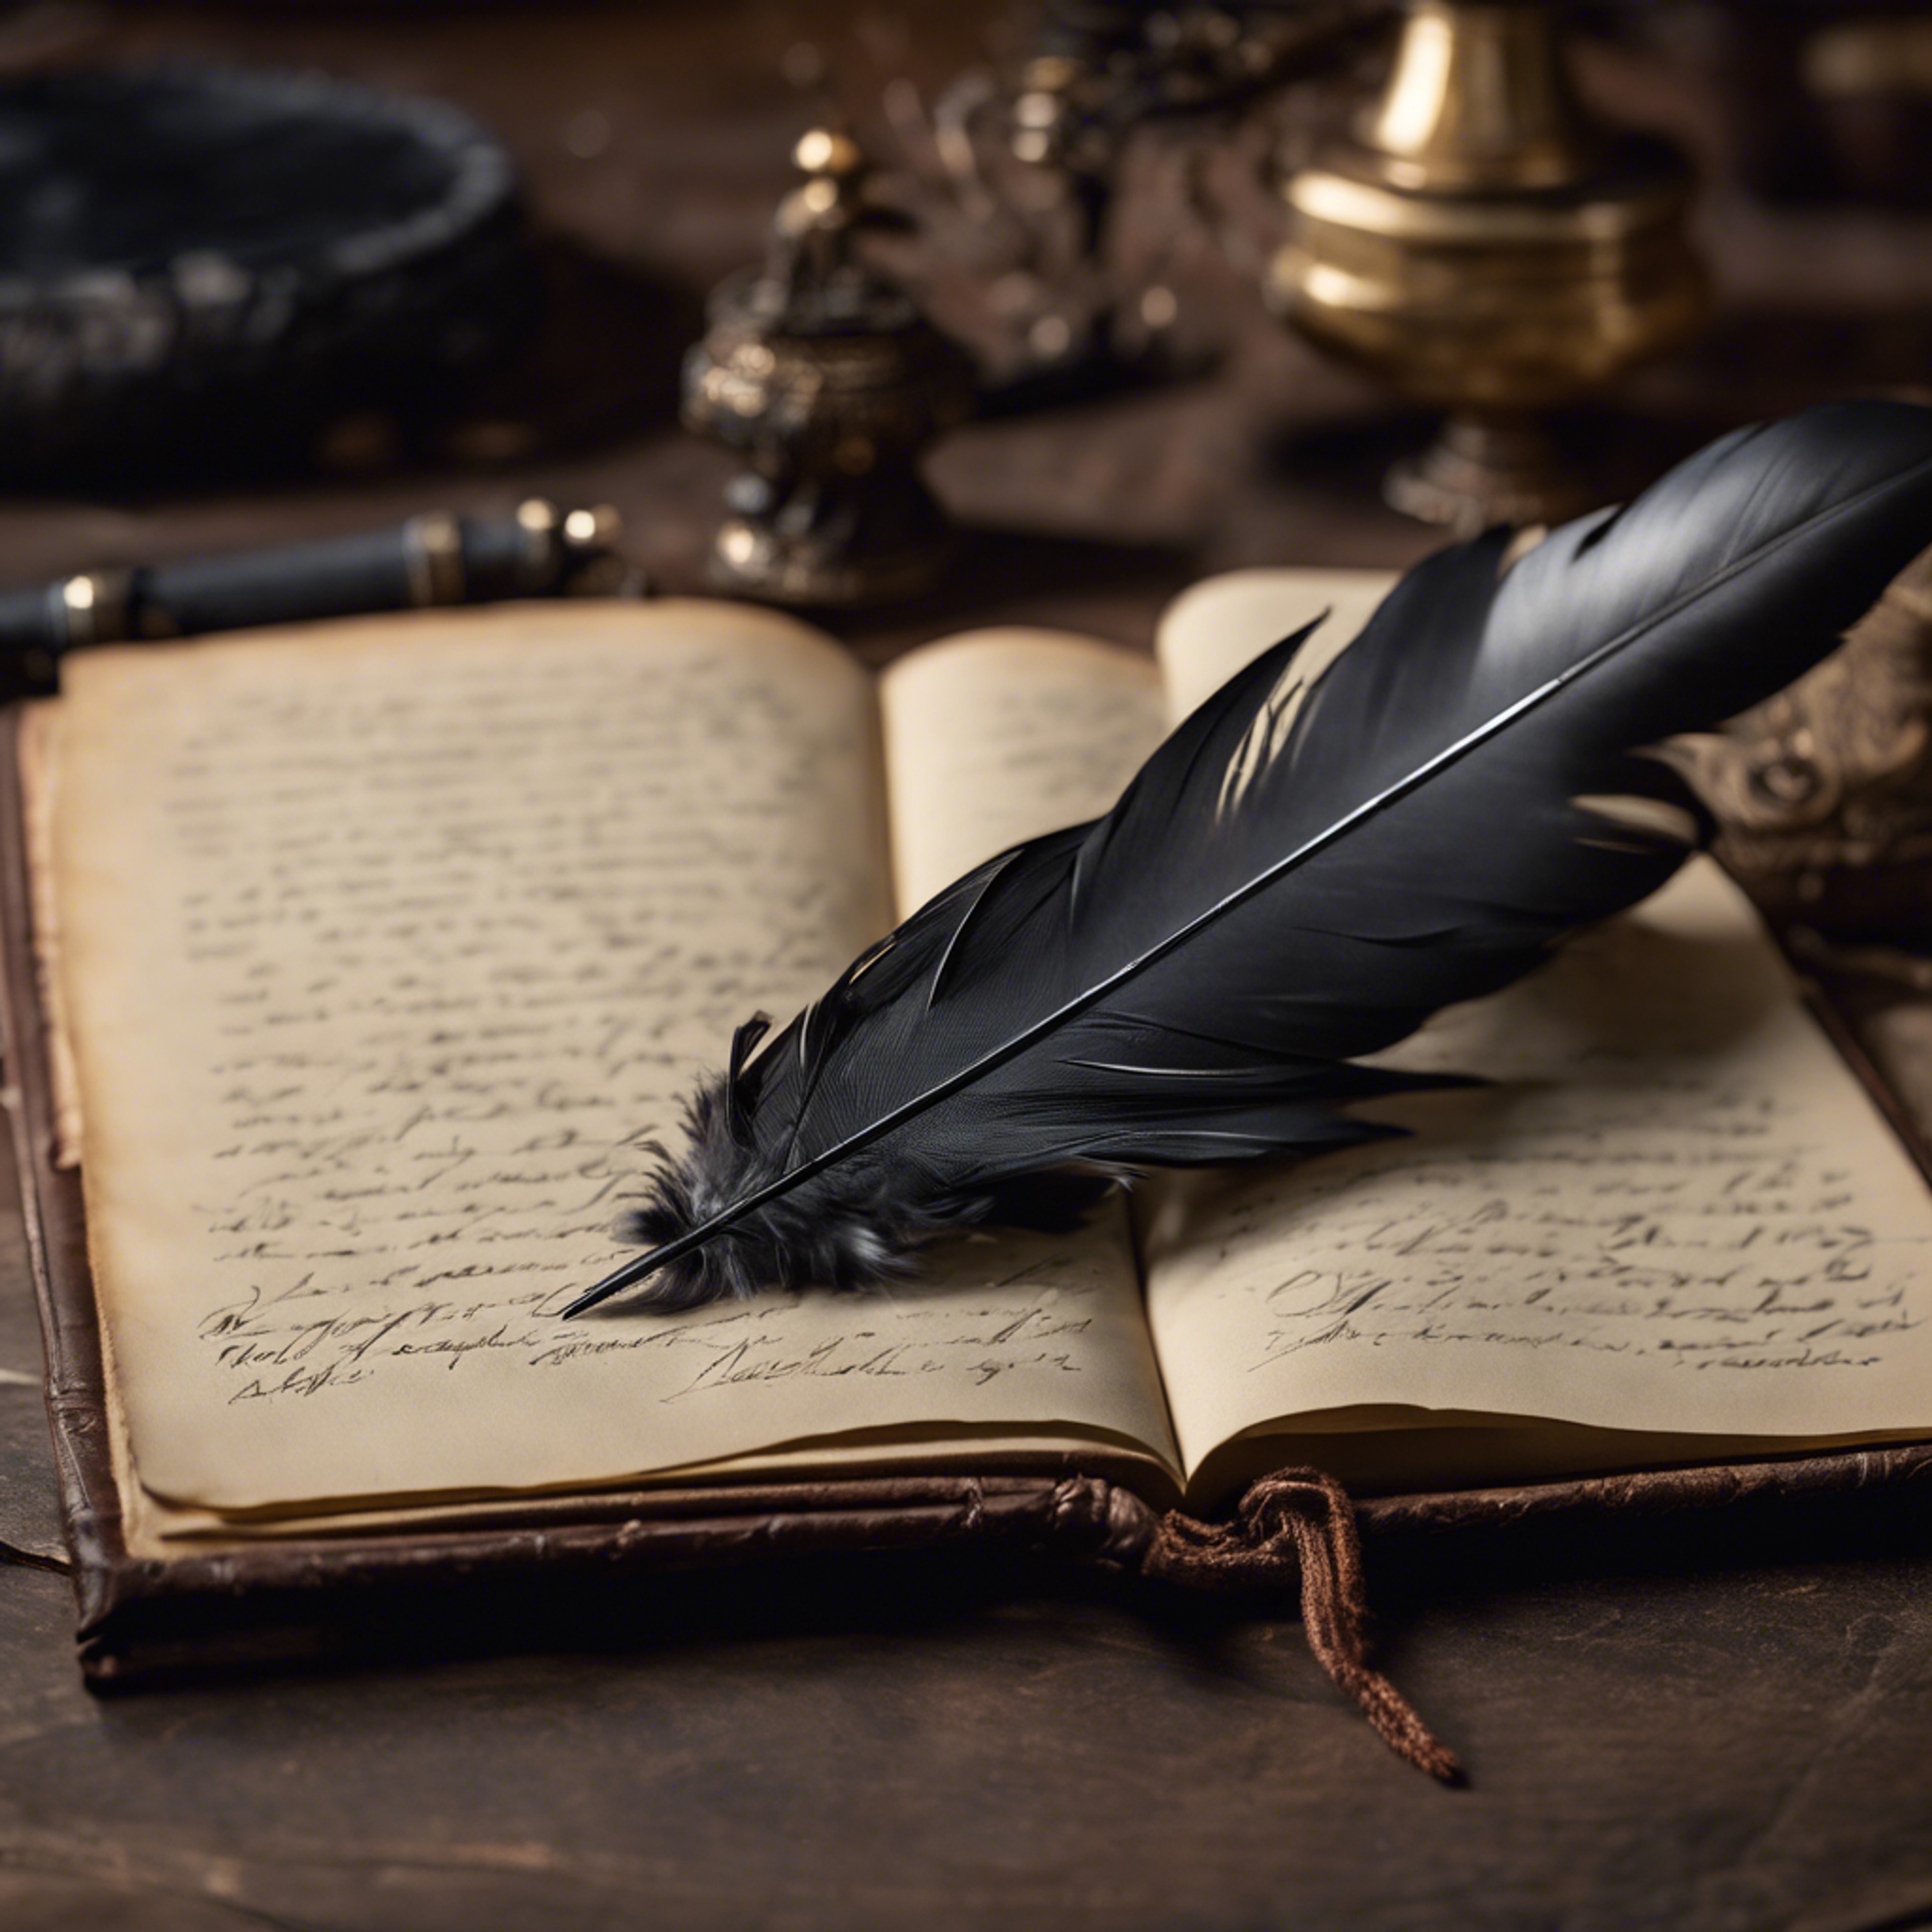 A black feather quill pen poised to write in an antique leather-bound journal. Wallpaper[1a576fd5c1f949af9941]